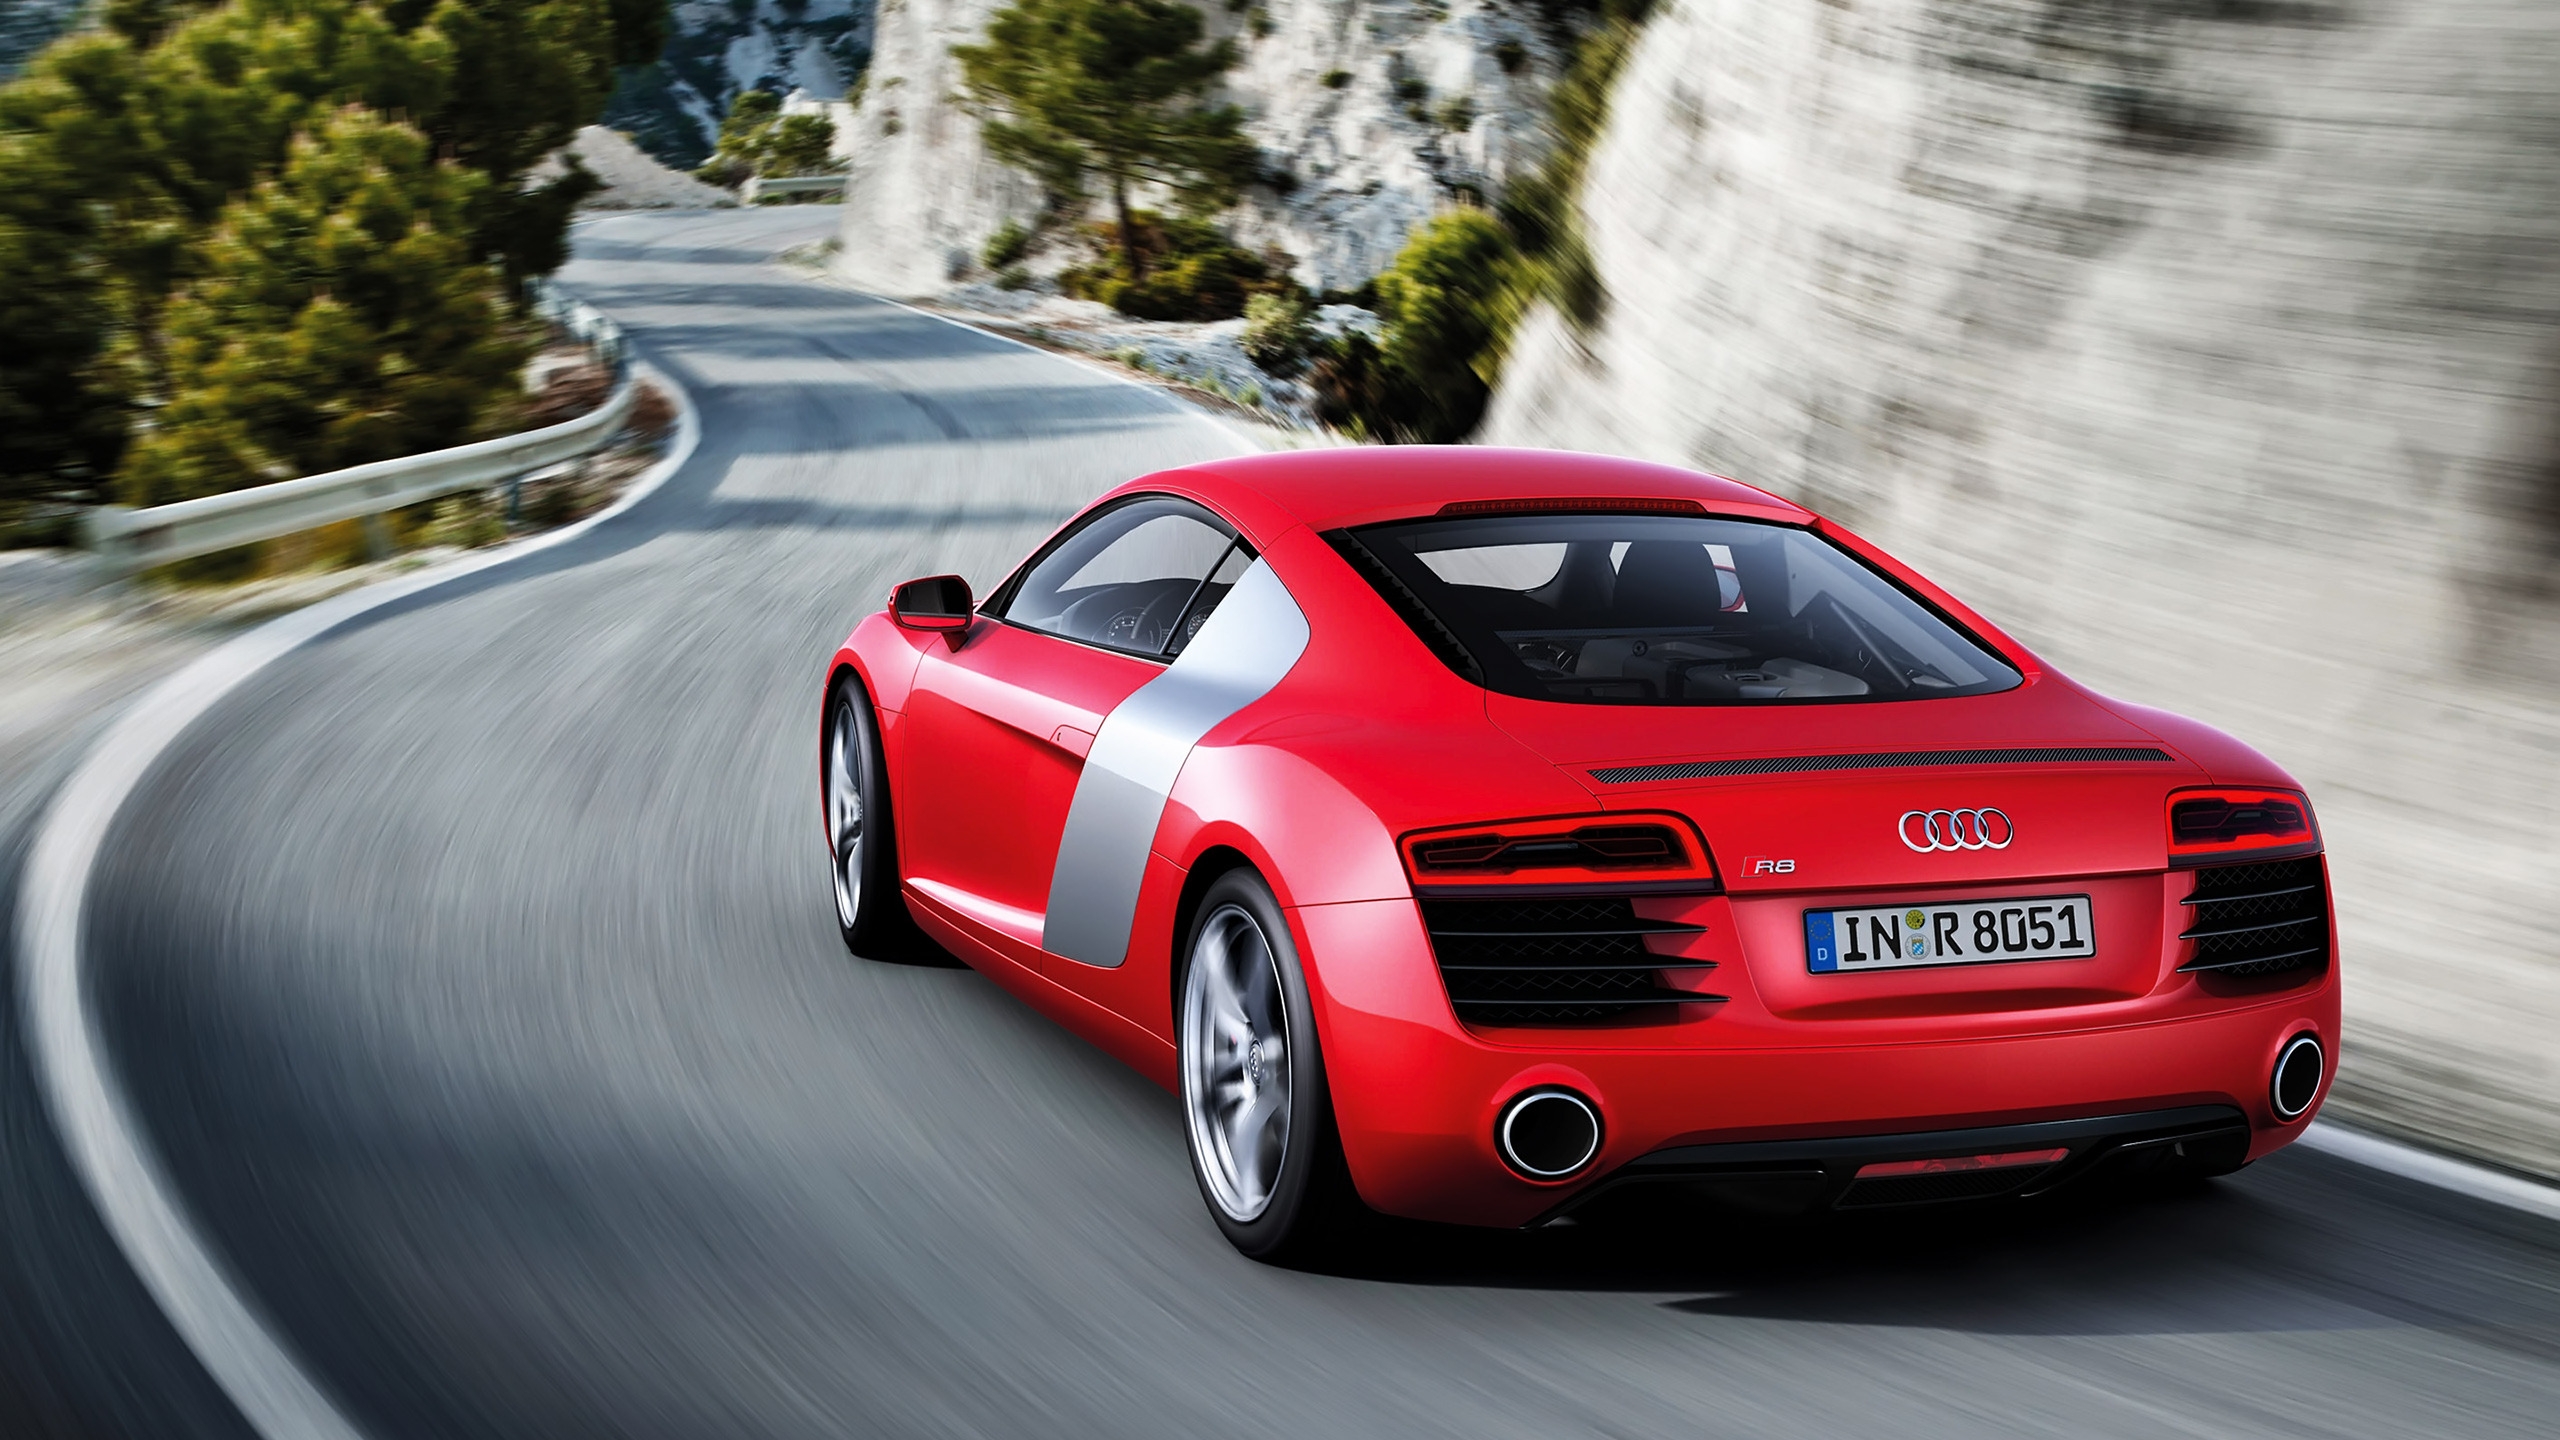 Gorgeous Red Audi R8 2013 for 2560x1440 HDTV resolution